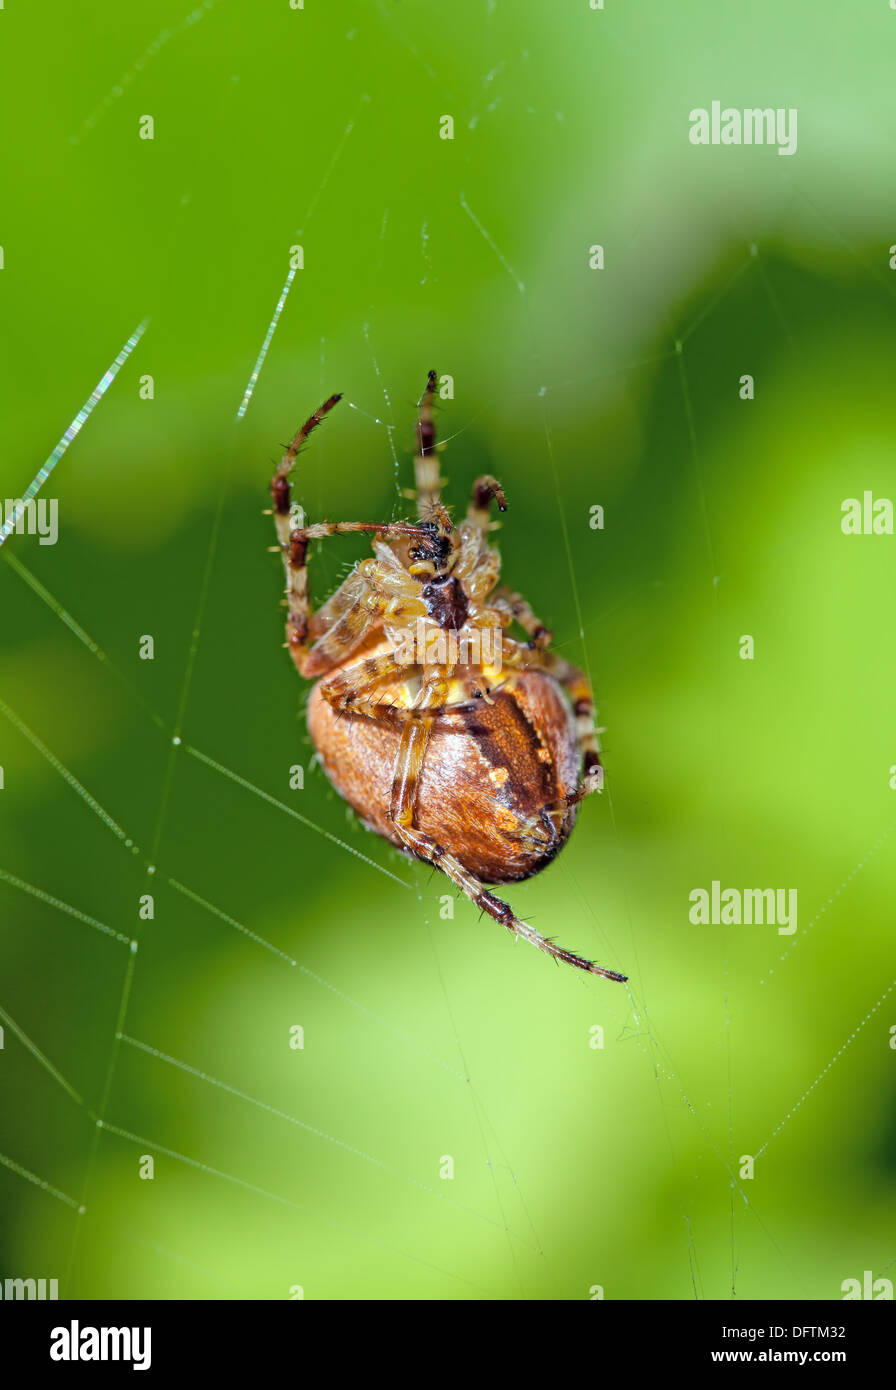 The poisonous spider sits in a web Stock Photo